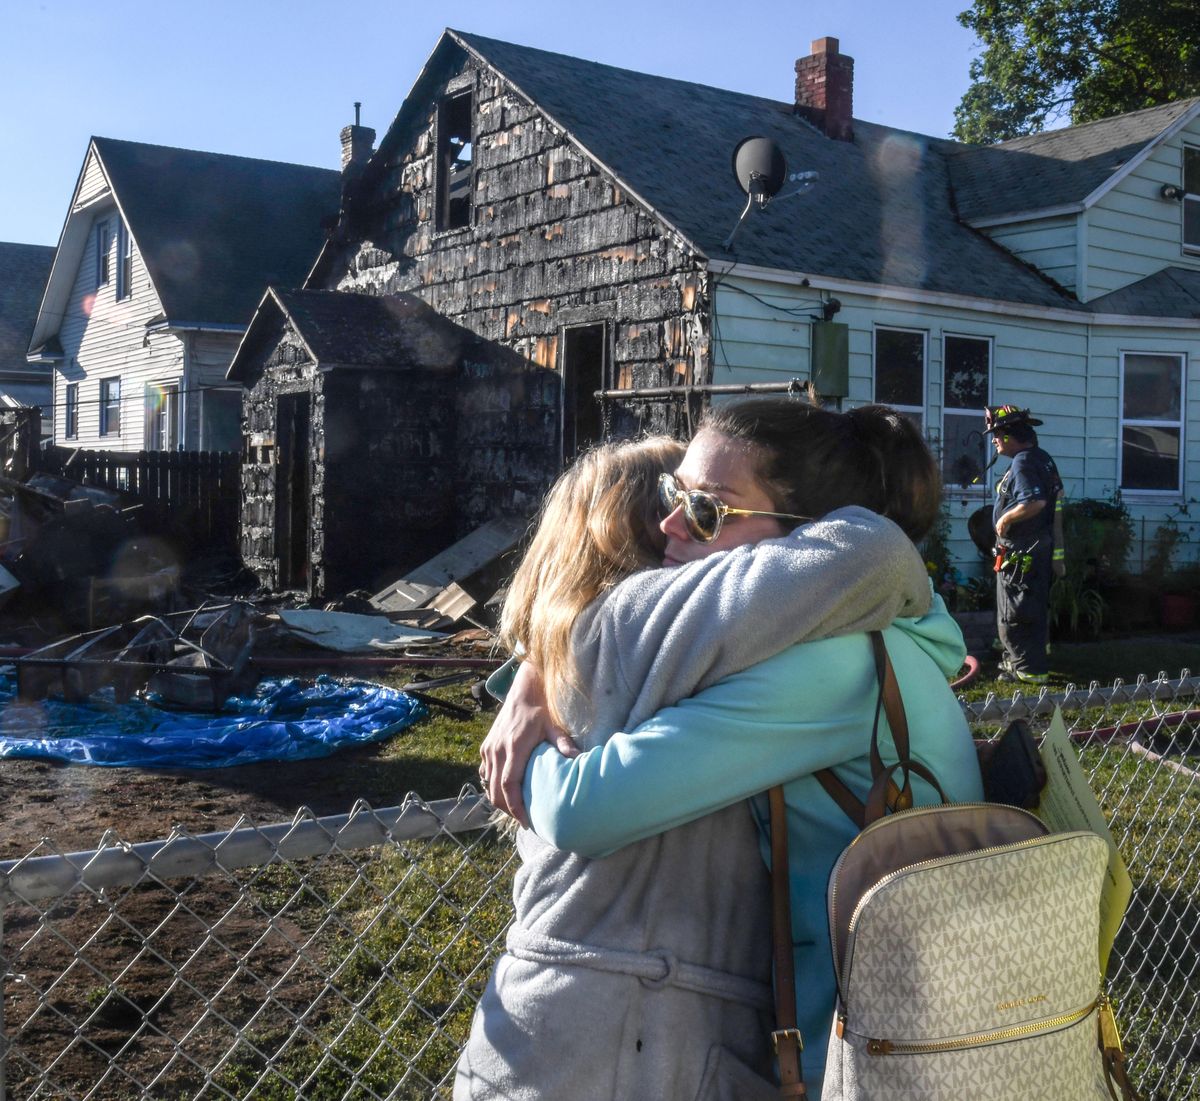 Homeowner Kathy Barton, left, gets an embrace from her daughter, Miranda Dowdy, on Friday, June 28, 2019, after a fire destroyed the rear of Barton’s house and several garages. Four people and four dogs made it out of the burning home at Queen Avenue and Stone Street in Spokane’s Hillyard neighborhood. (Dan Pelle / The Spokesman-Review)